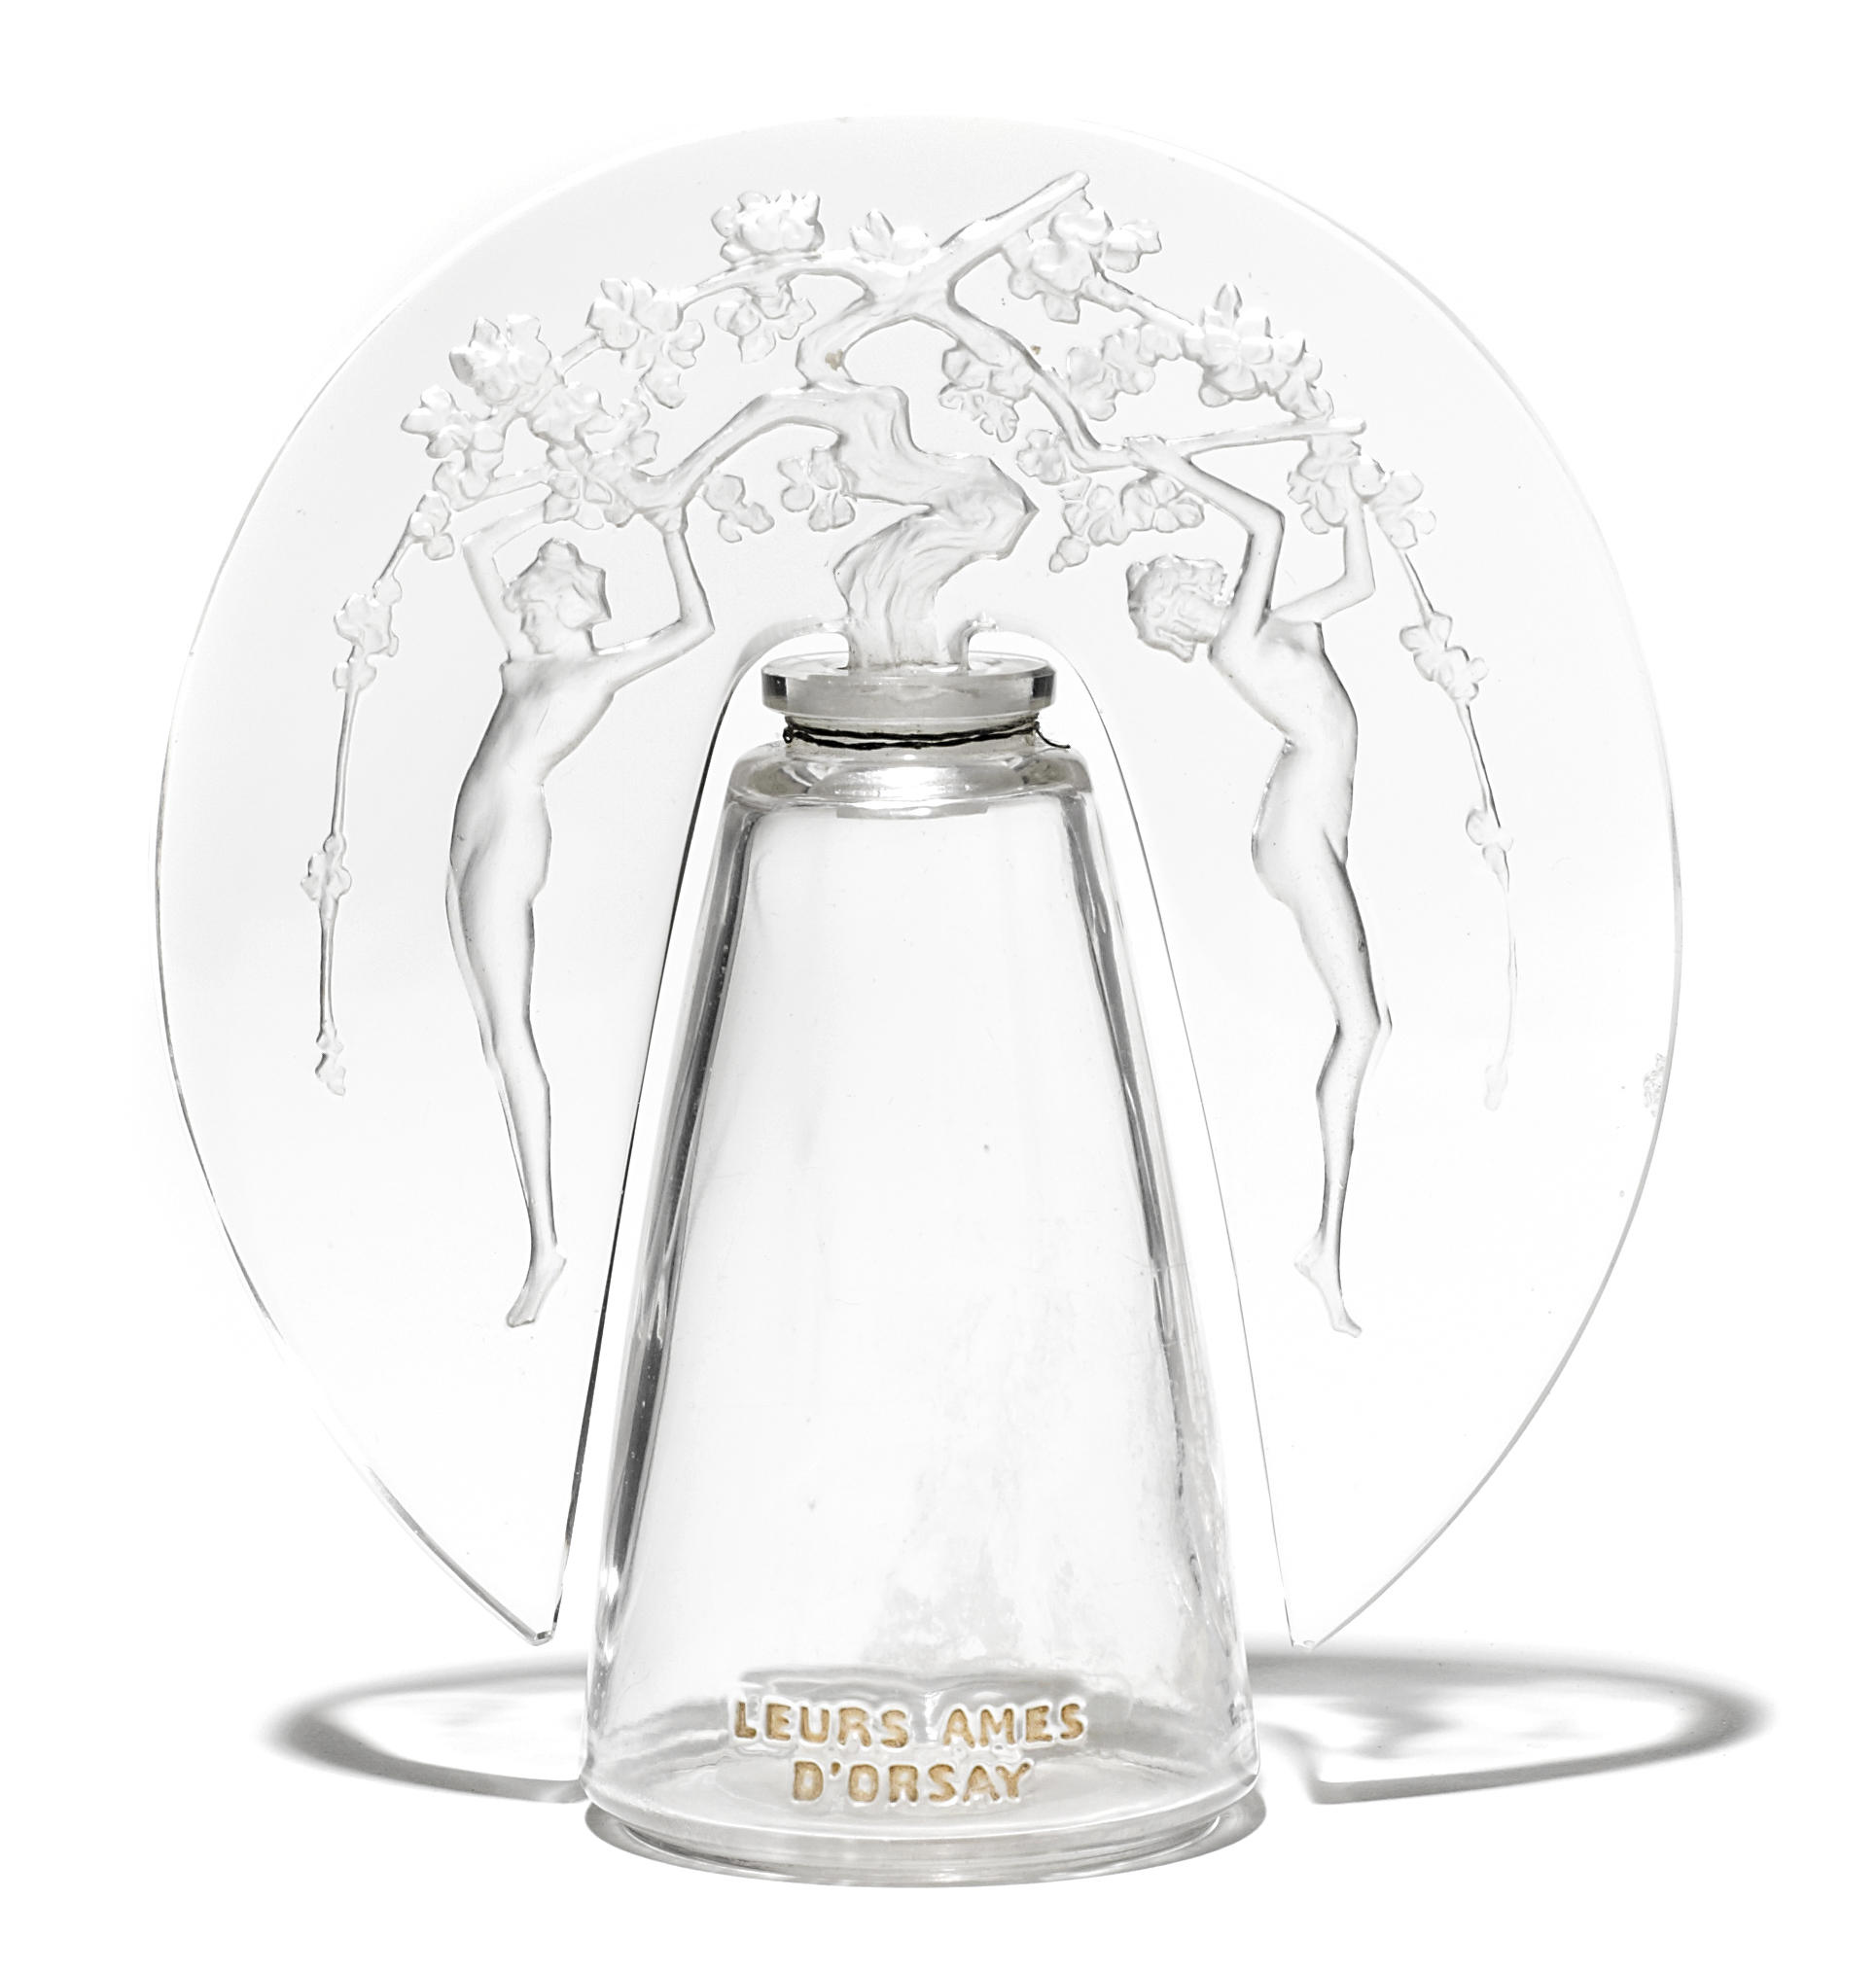 A Ren Lalique for D'Orsay molded